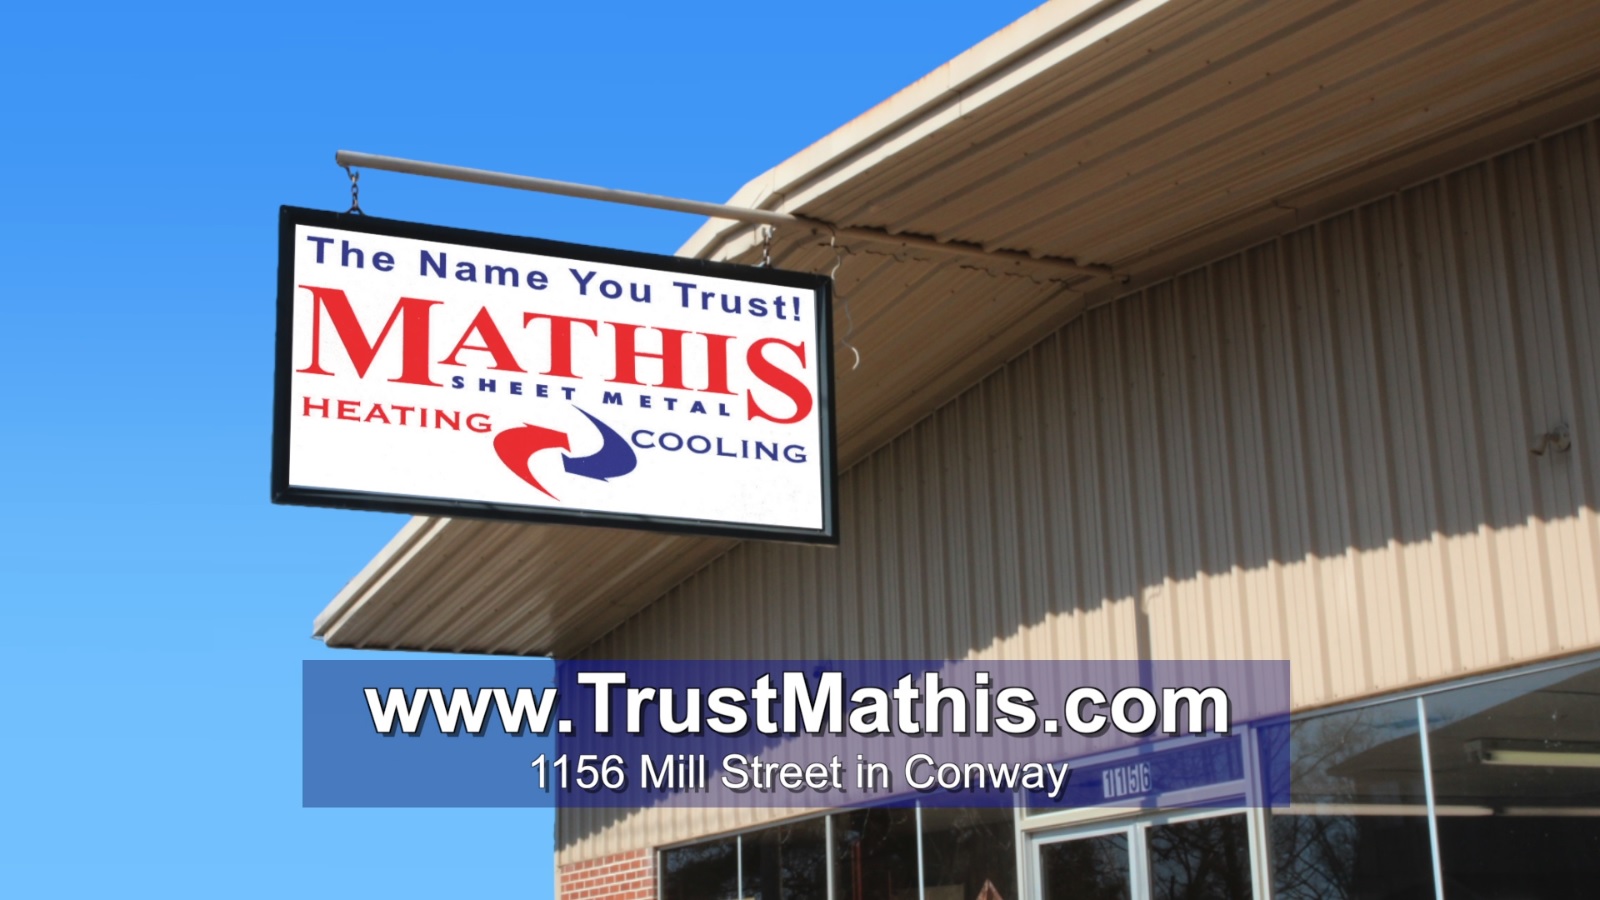 Mathis Heating & Cooling